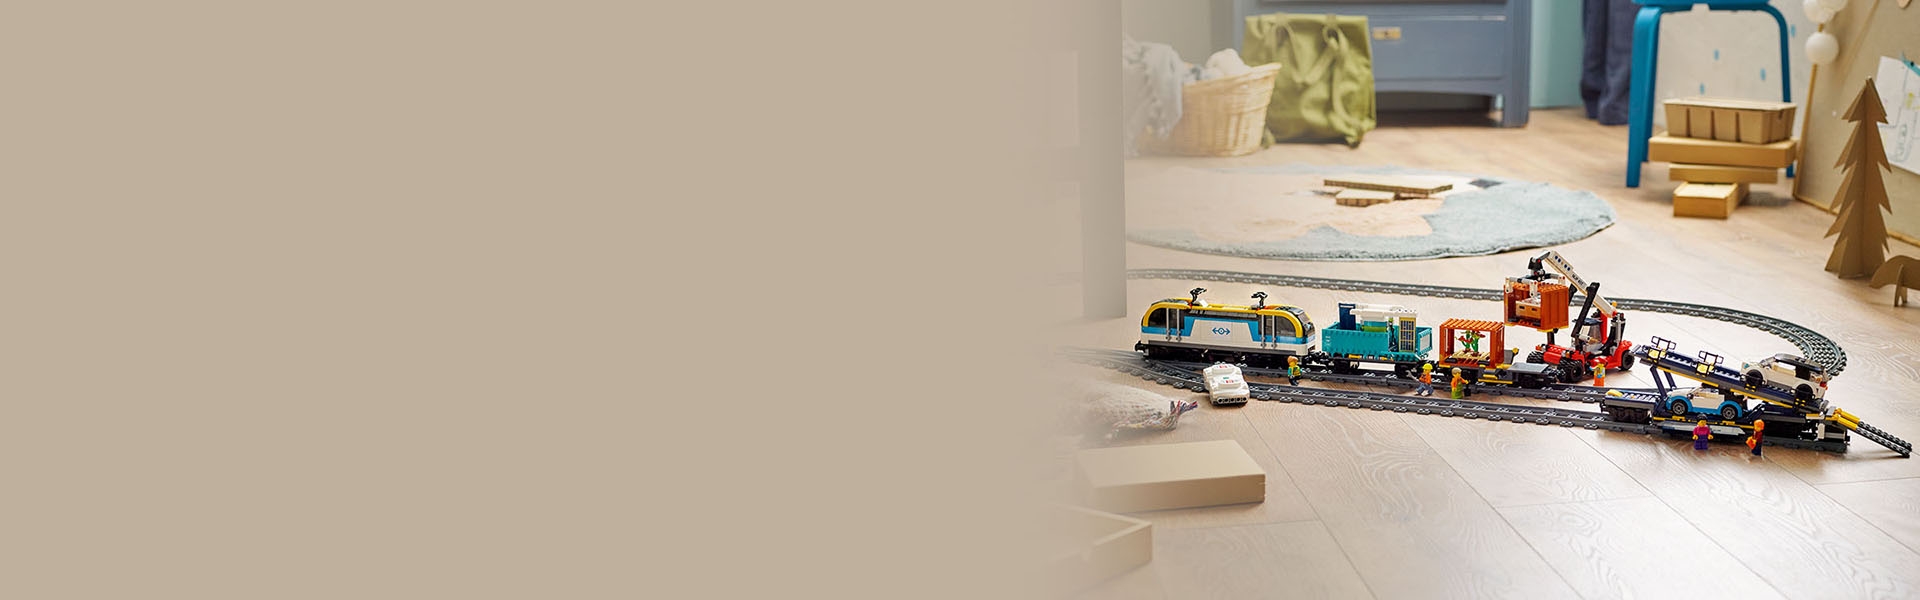 Express Passenger Train 60337 | City | Buy online at the Official 